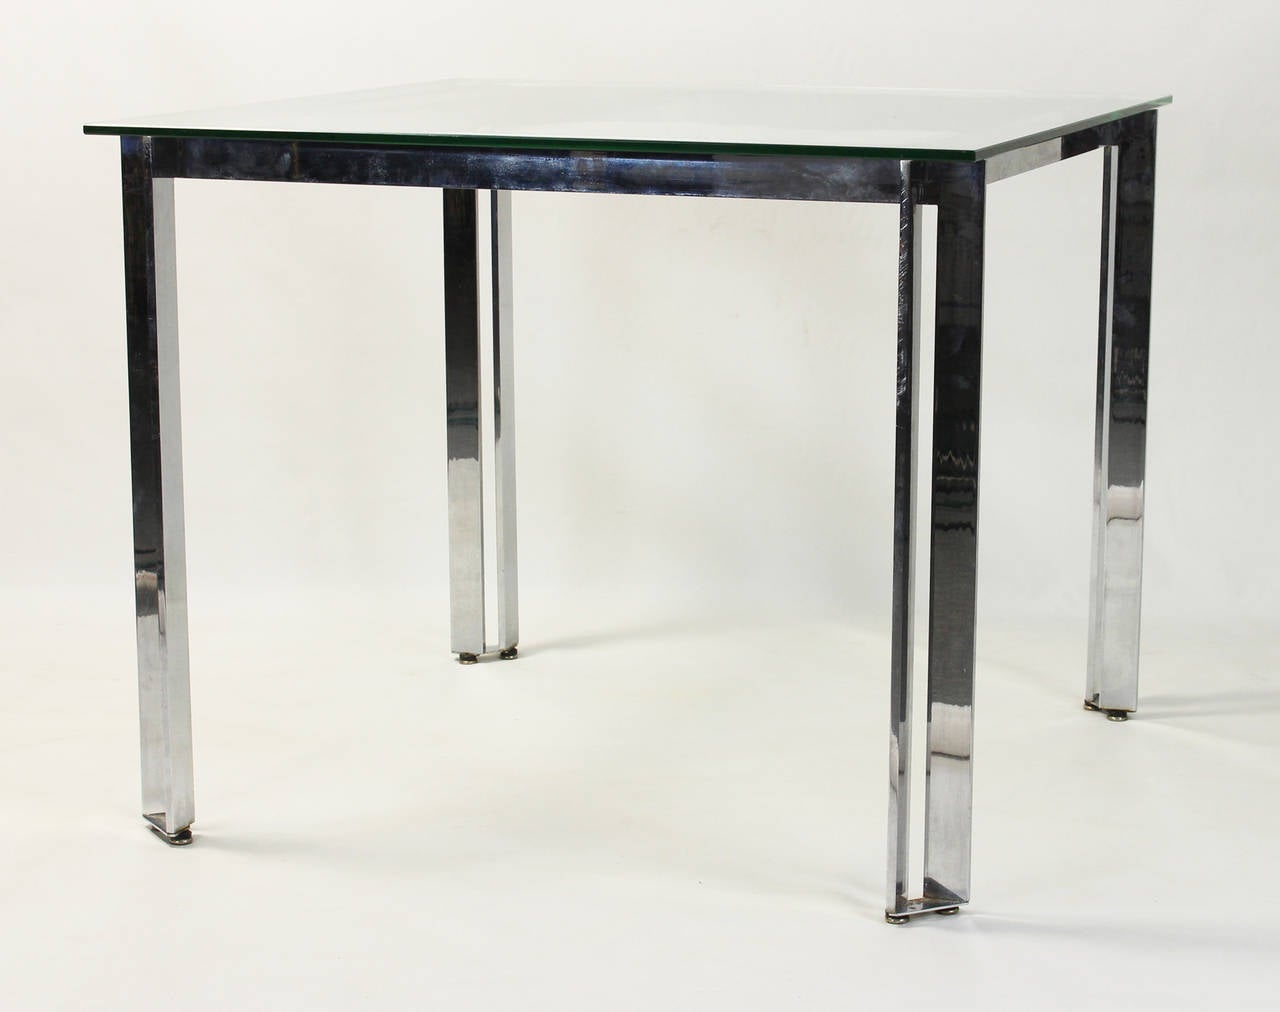 A mid-20th century chrome and glass square breakfast or games table.